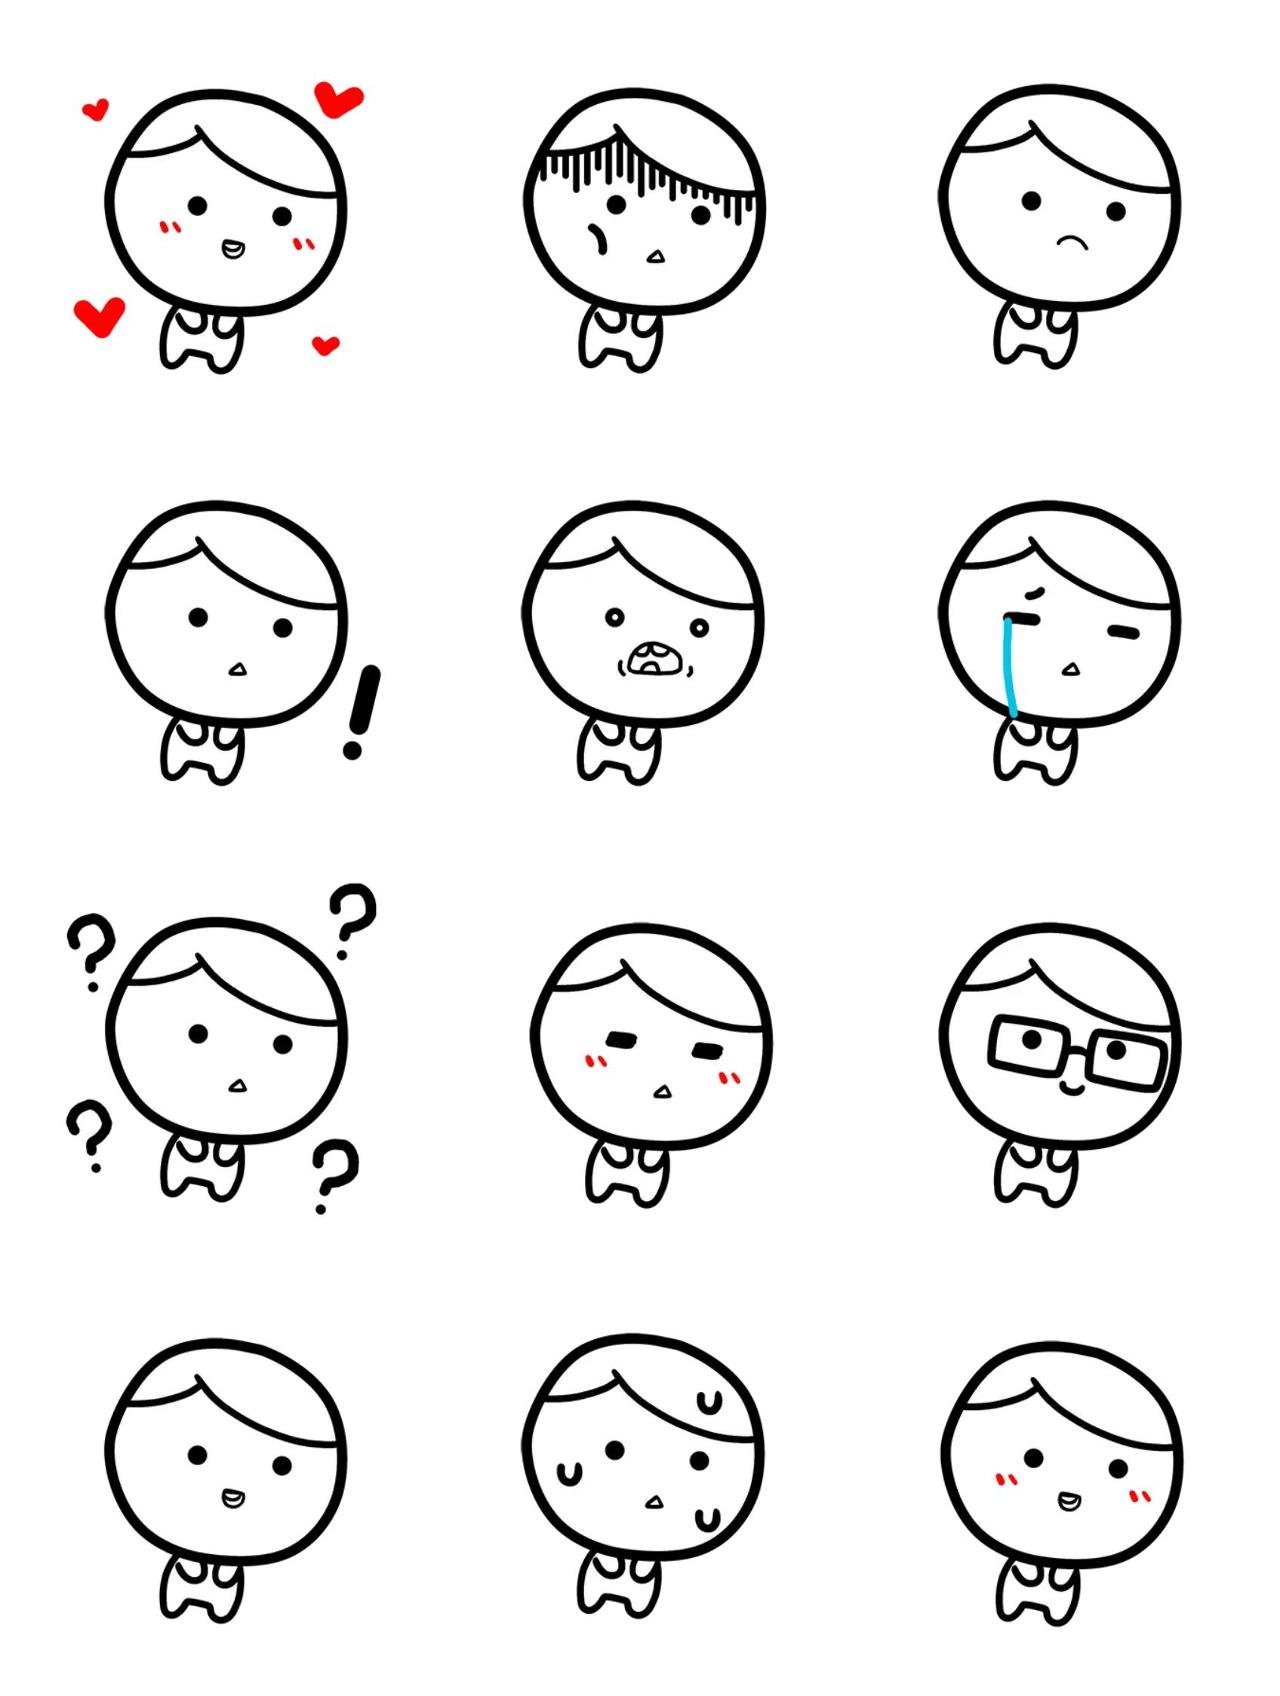 Cute boy Randy Gag,People sticker pack for Whatsapp, Telegram, Signal, and others chatting and message apps